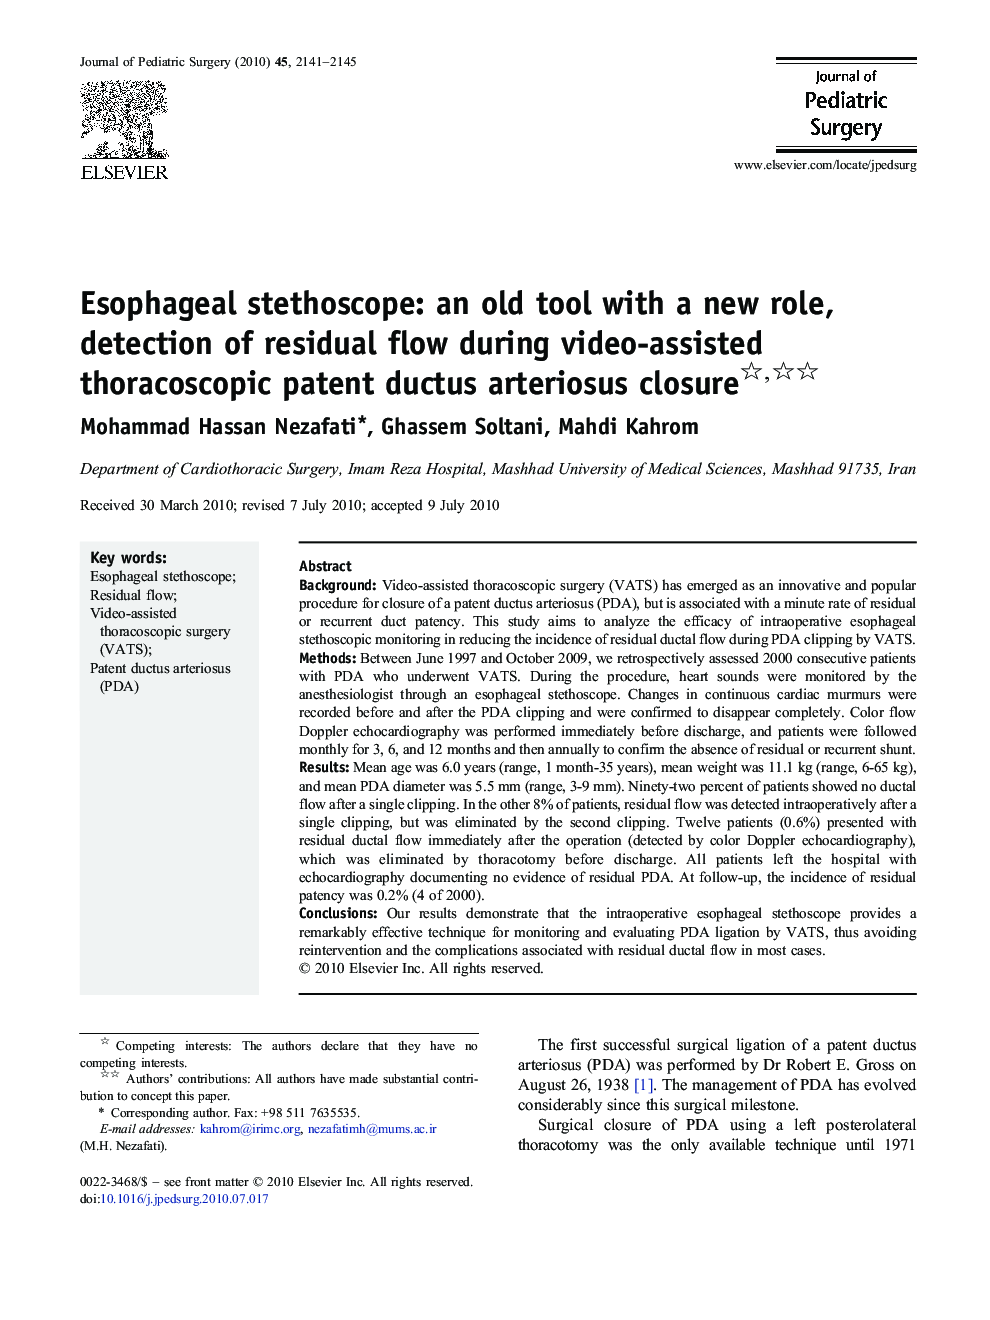 Esophageal stethoscope: an old tool with a new role, detection of residual flow during video-assisted thoracoscopic patent ductus arteriosus closure 